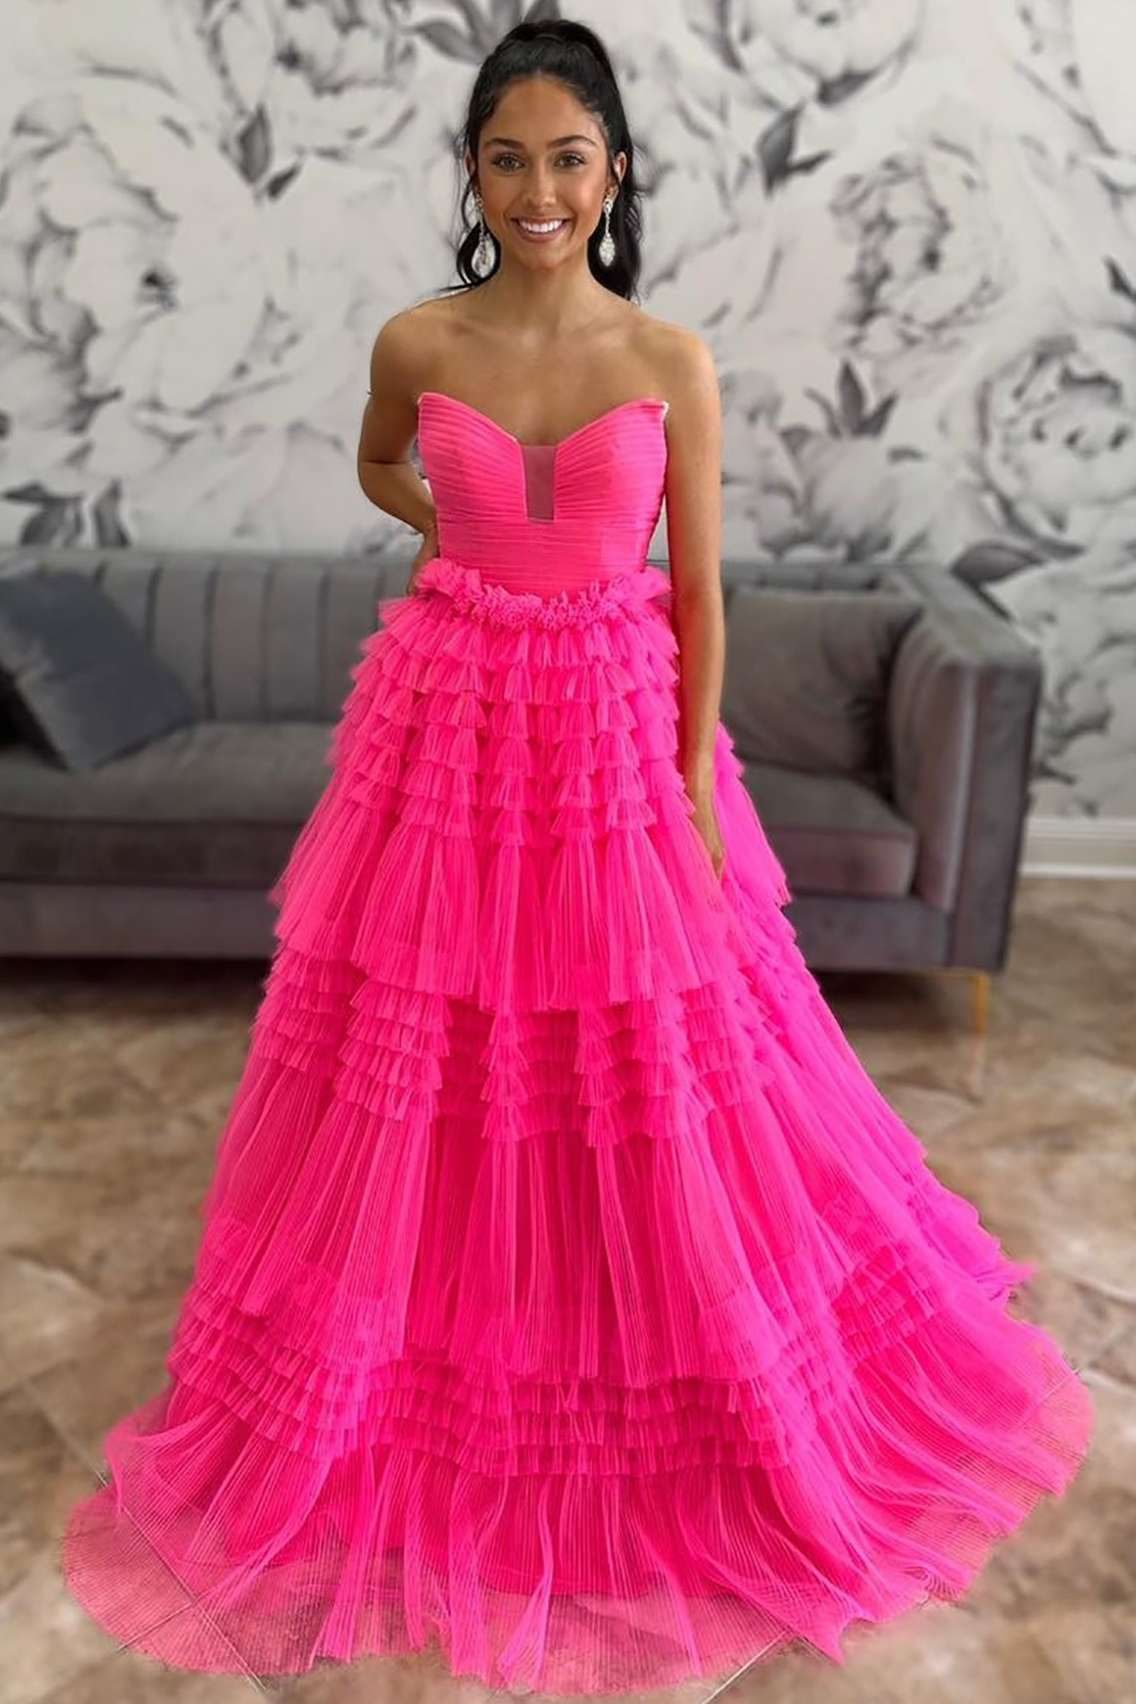 Hot Pink A-Line Strapless Tiered Tulle Prom Dresses,BD930859